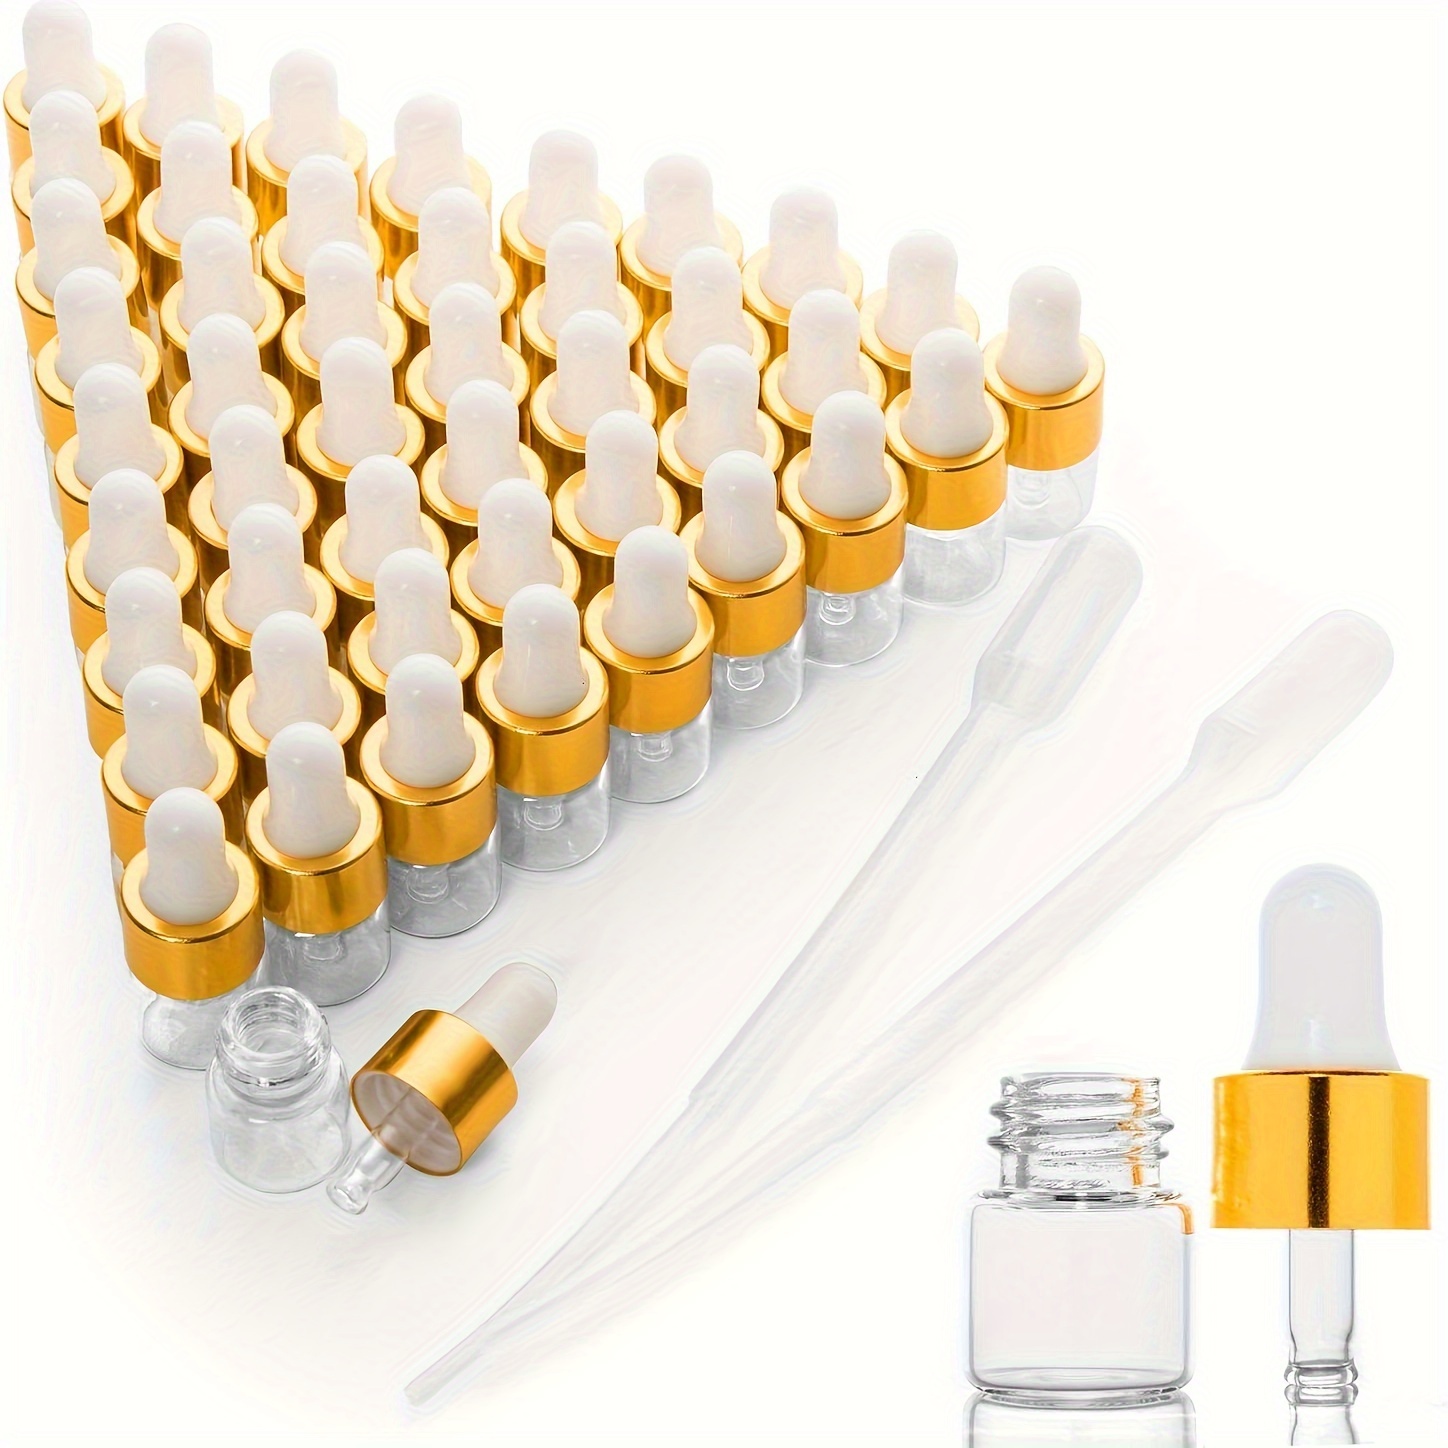 

50-piece 1ml Clear Glass Dropper Bottles For Essential Oils - Mini Travel-sized Vials With Pipettes, Includes Funnel & 3 Droppers, Perfect For Perfume & Liquid Samples